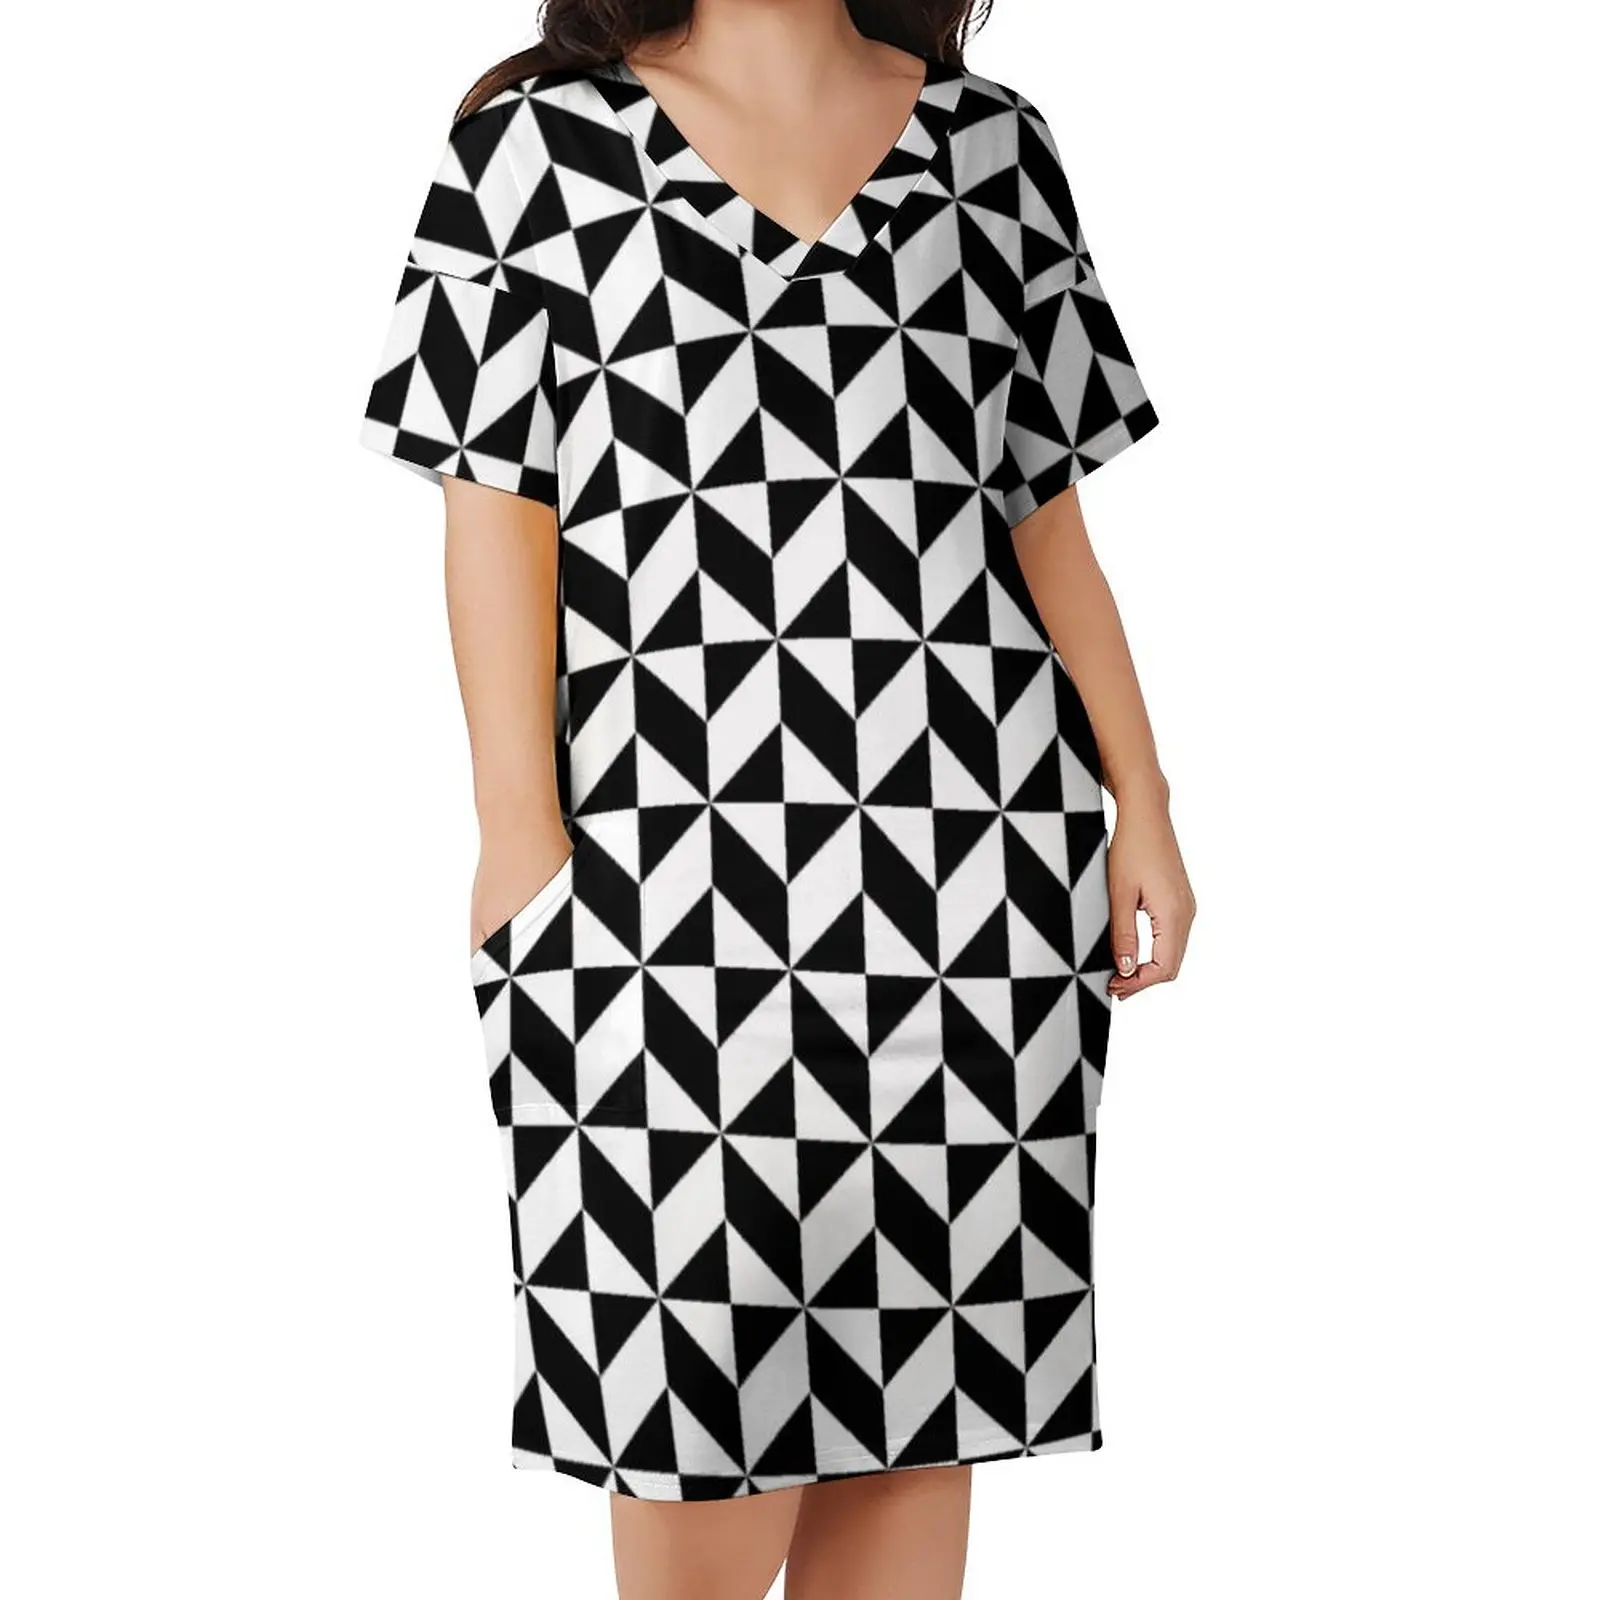 Abstract Geometry Casual Dress Female Black and White Cute Dresses Summer Short Sleeve Streetwear Print Dress Plus Size 3XL 4XL